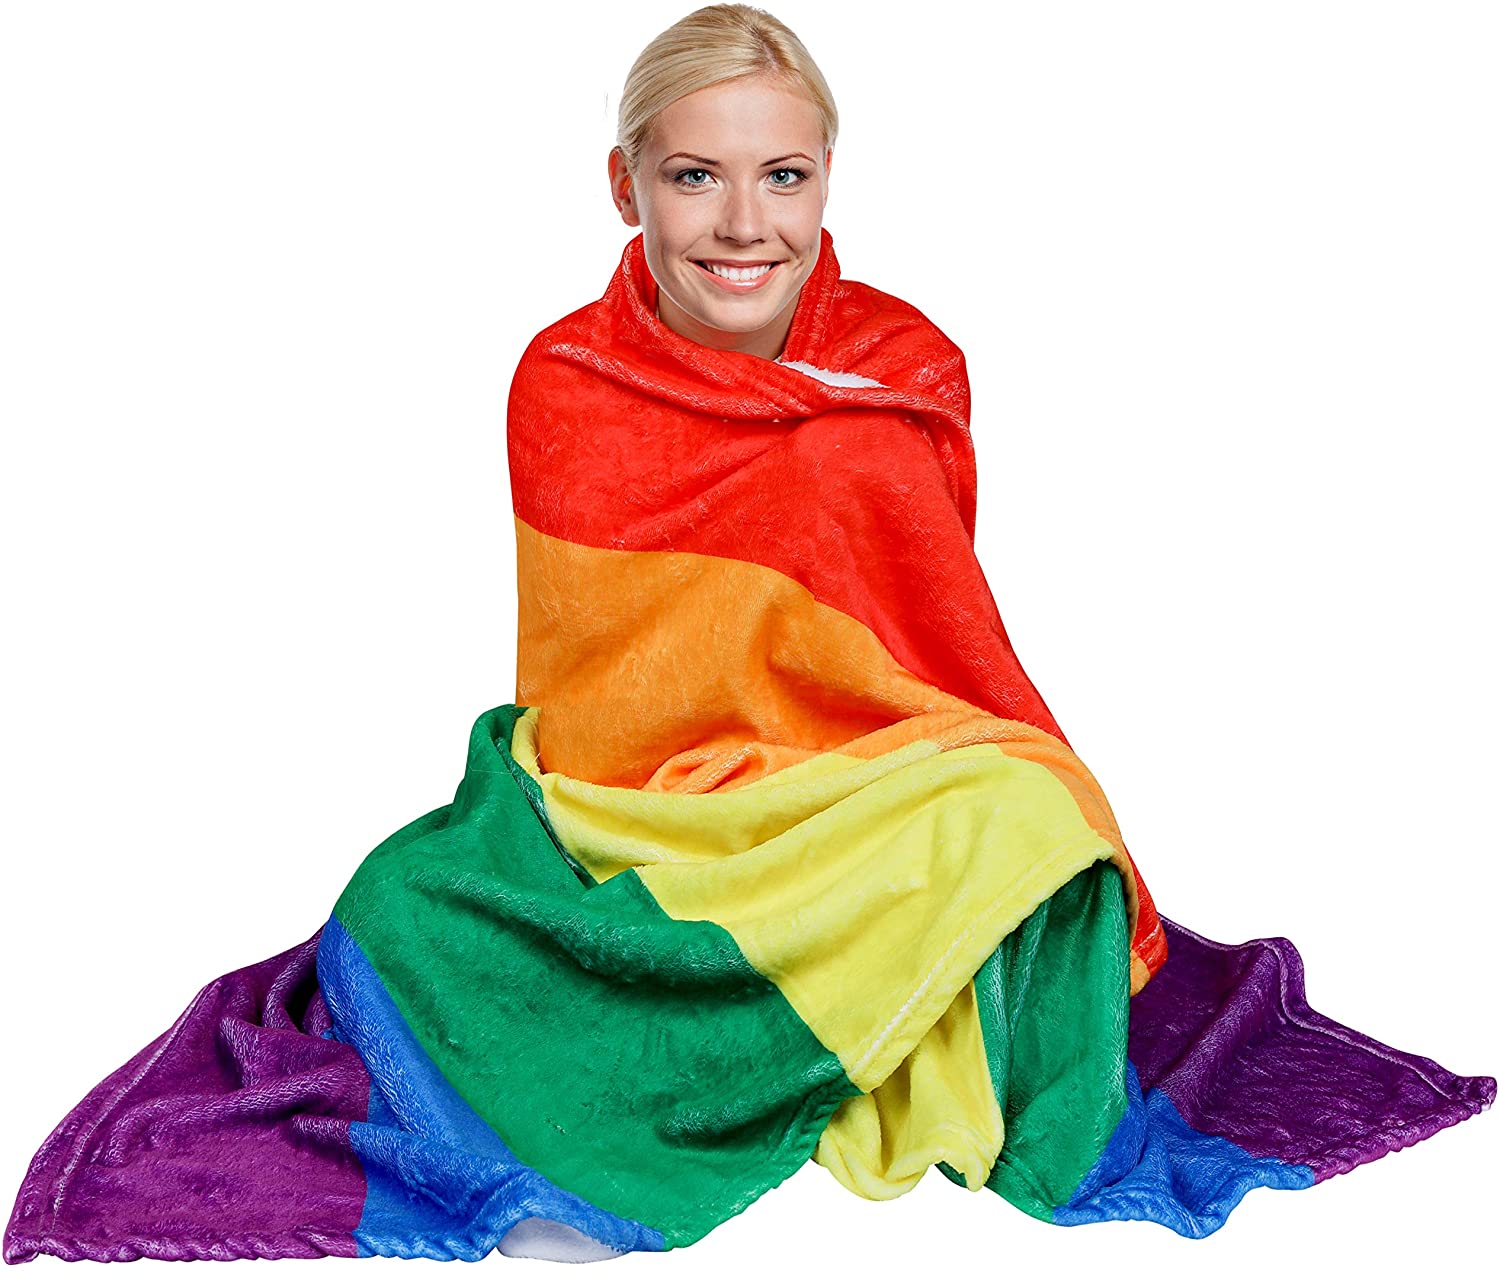 Pride Throw Blanket/ Lgbt Rainbow Pride Blanket Warm And Cozy Throw For Bed/ Gay Pride Accessories